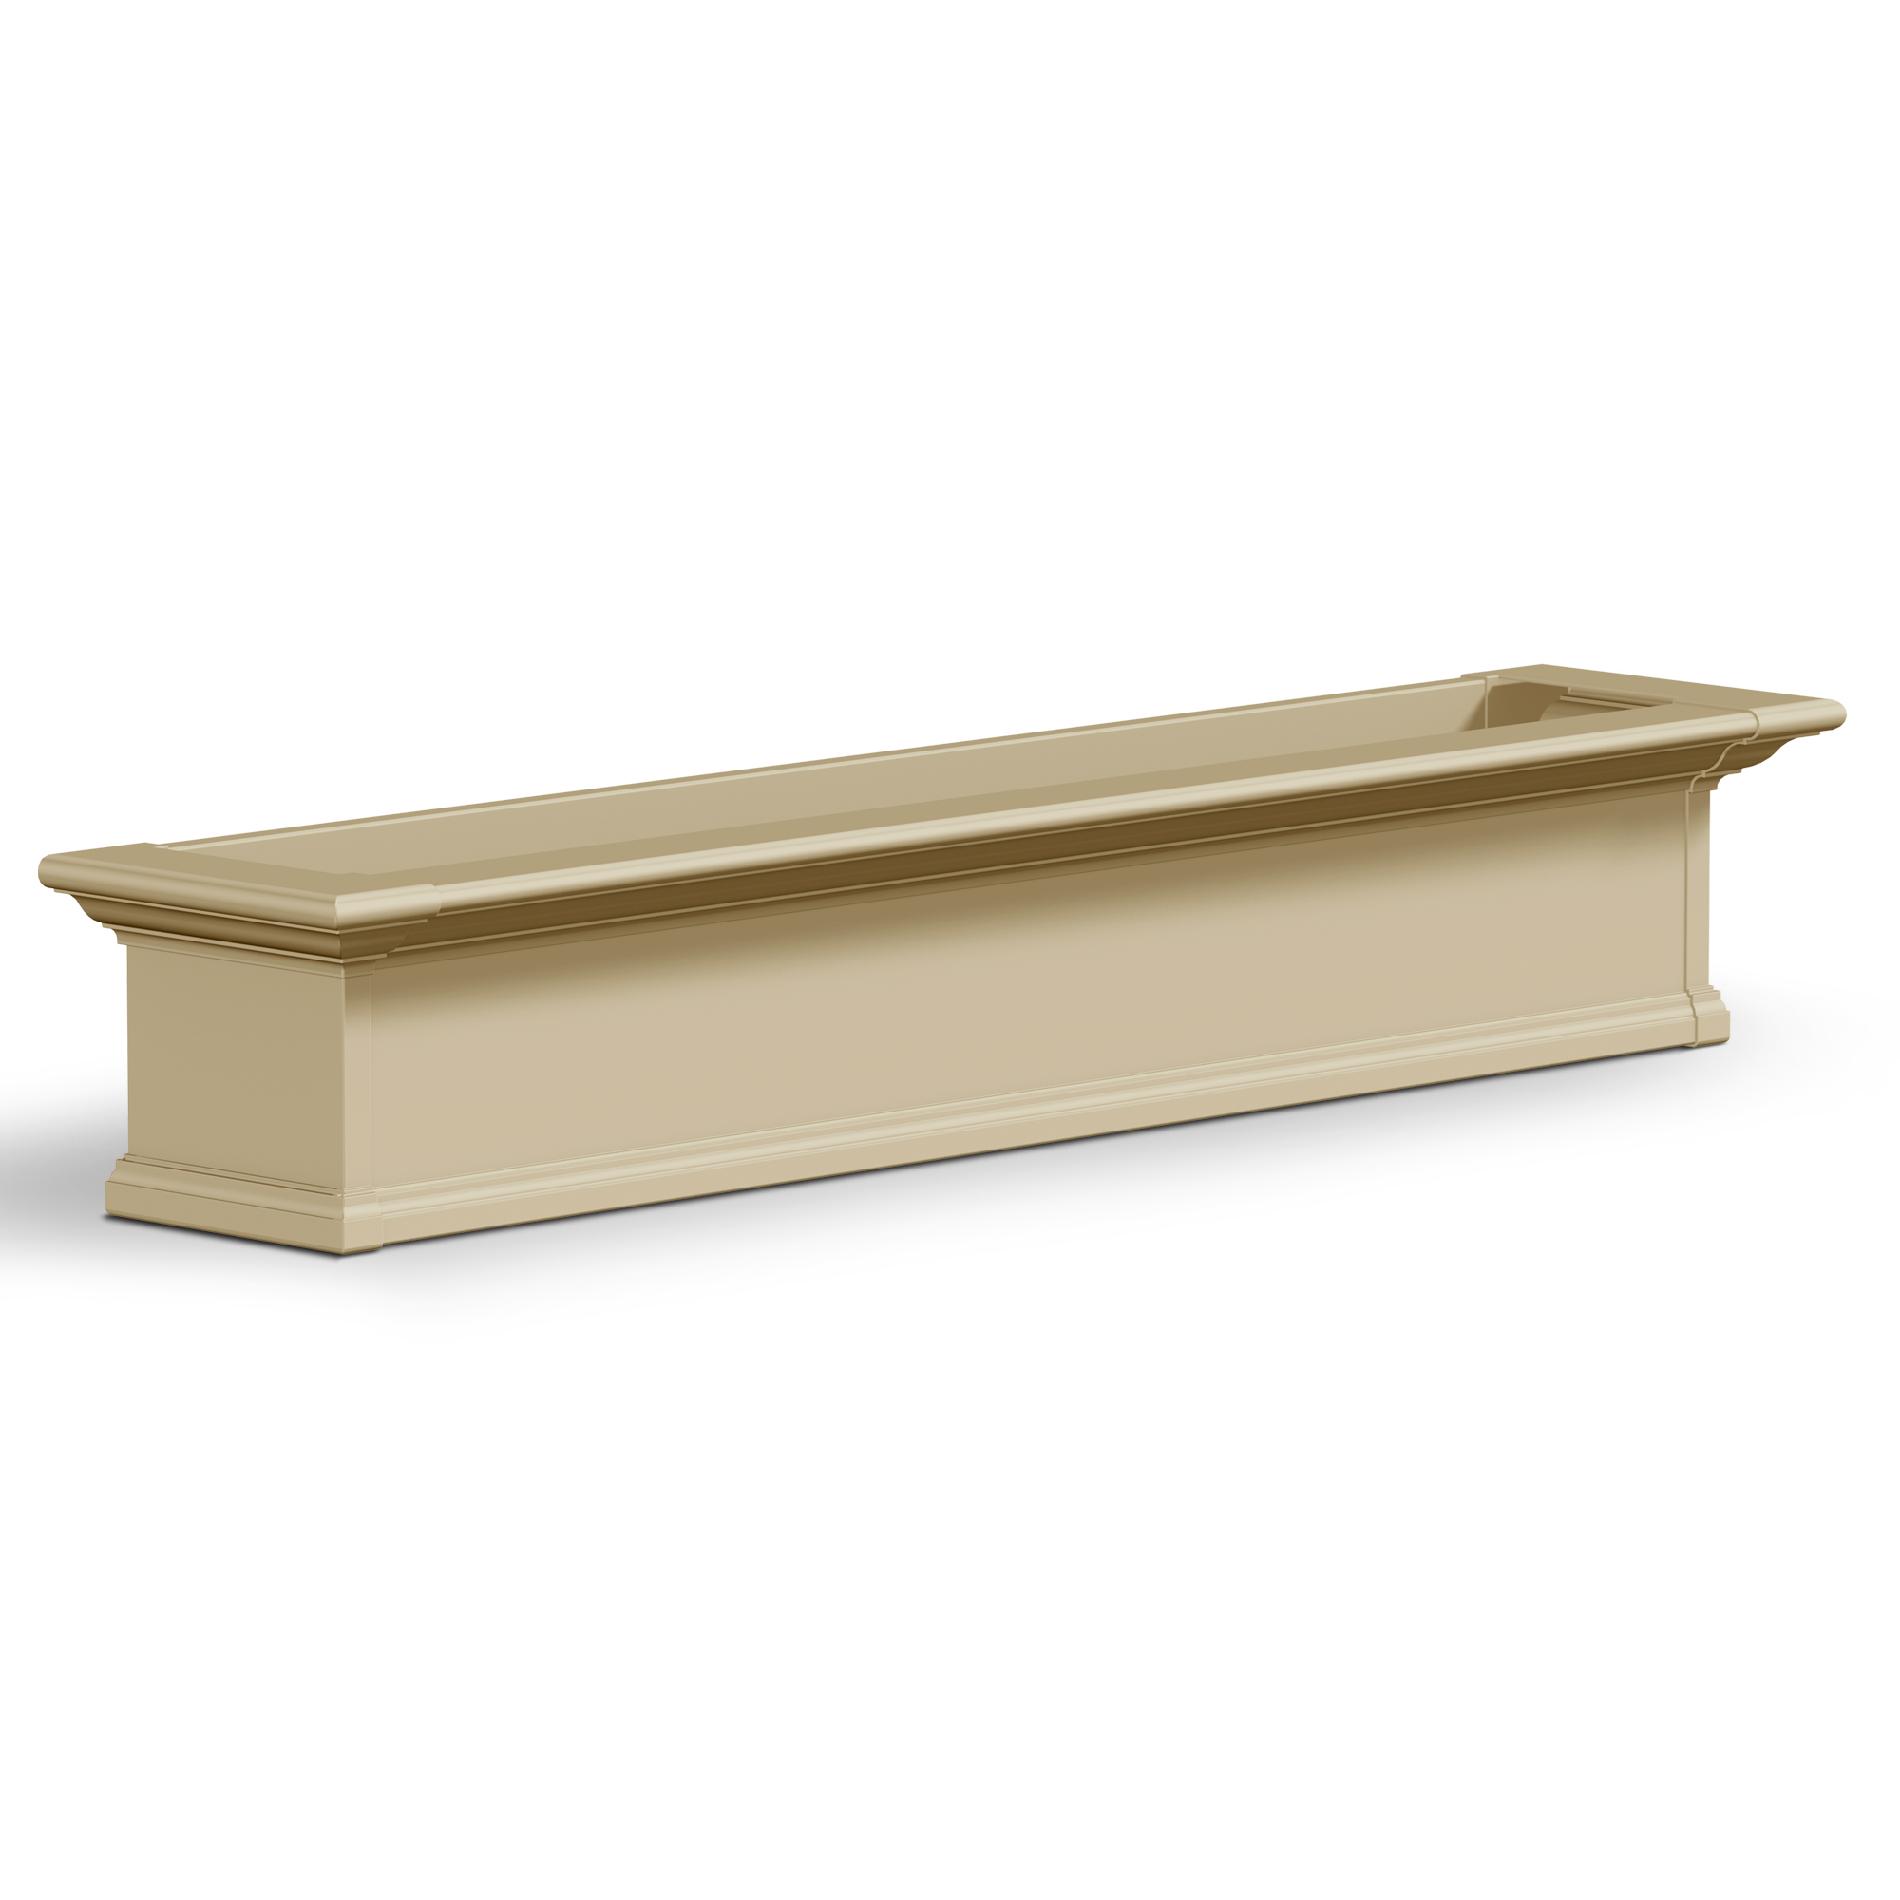 Yorkshire Window Box 5FT White Or Clay "KD"